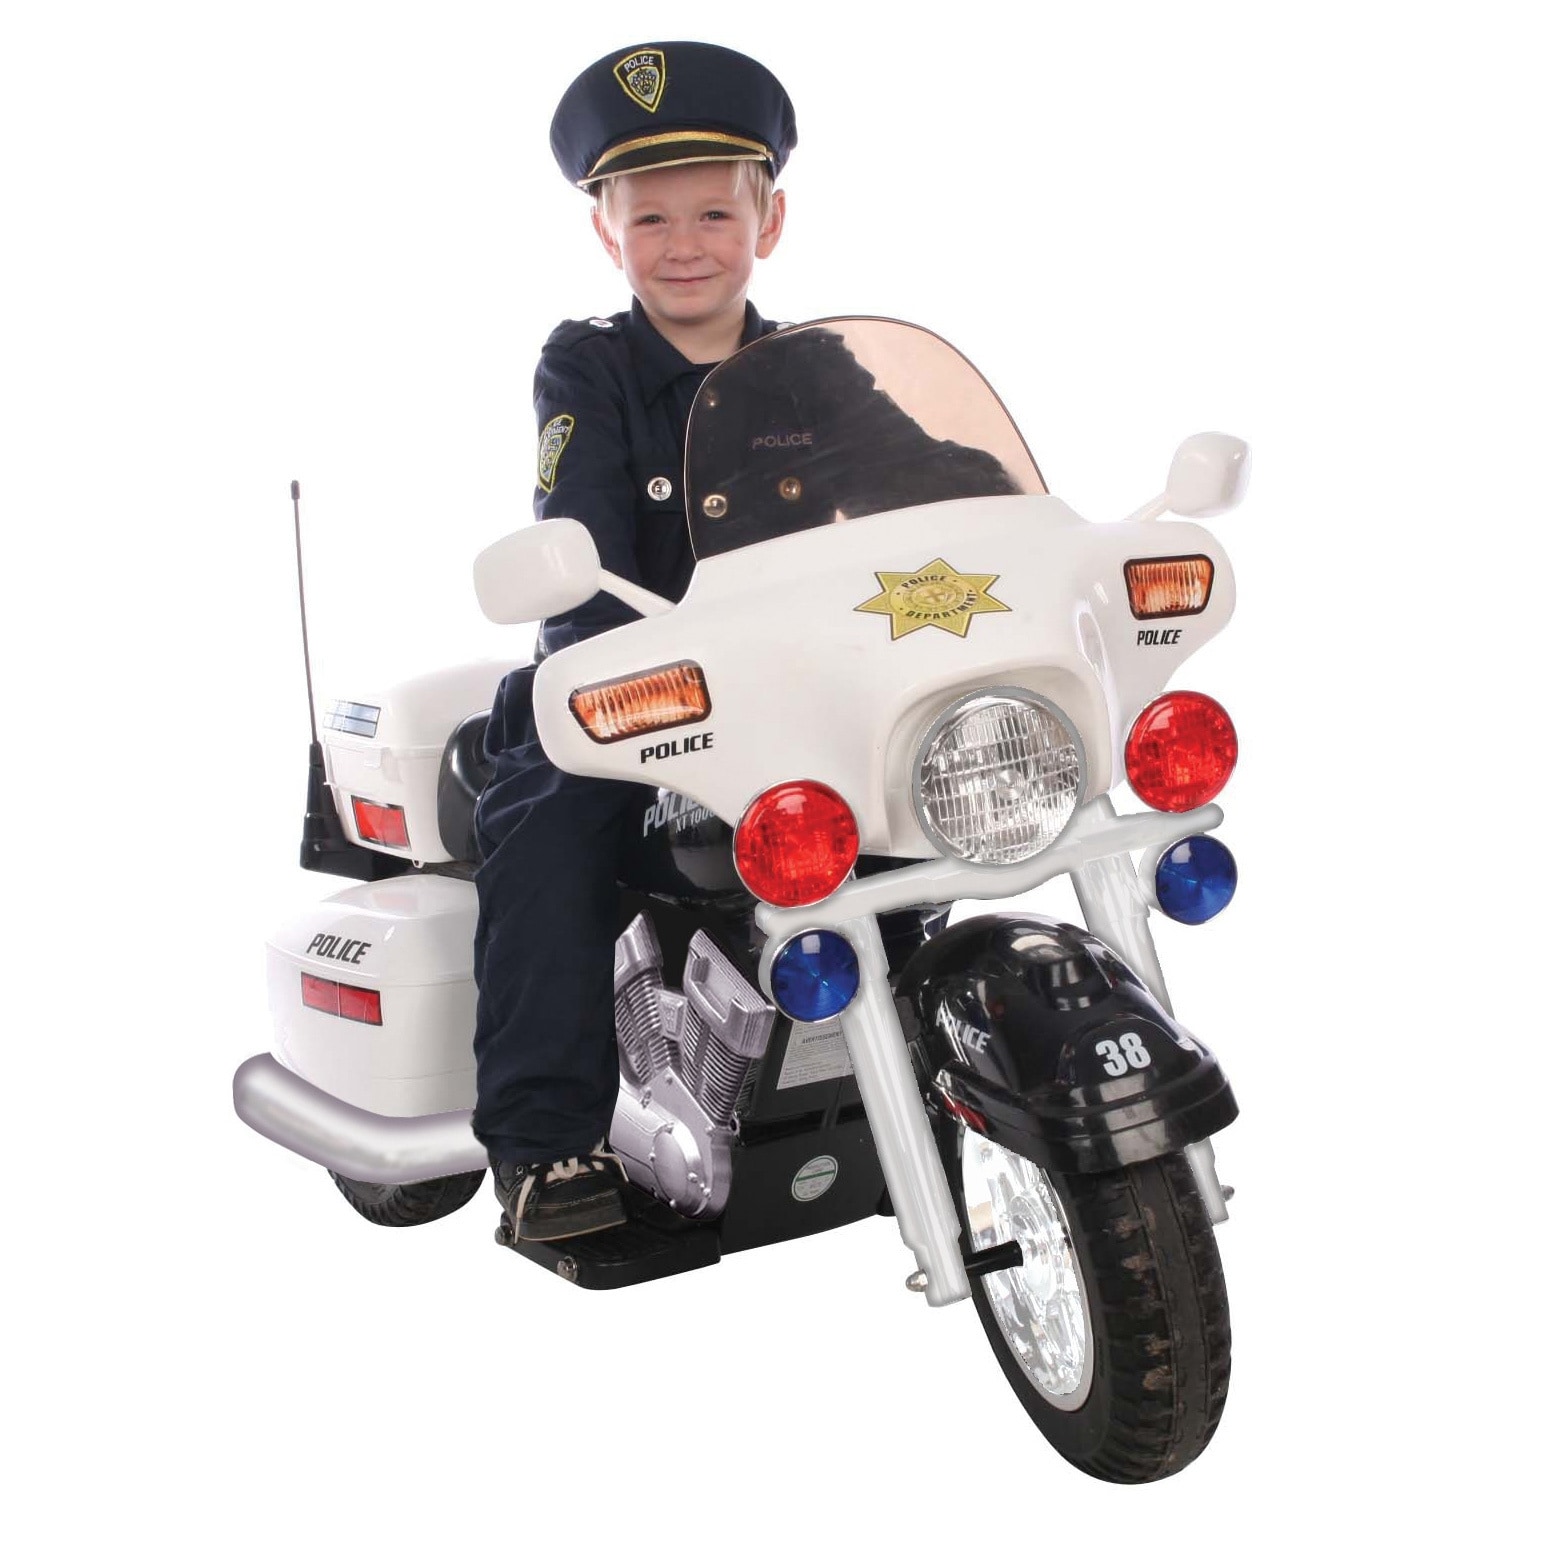 police battery operated ride on